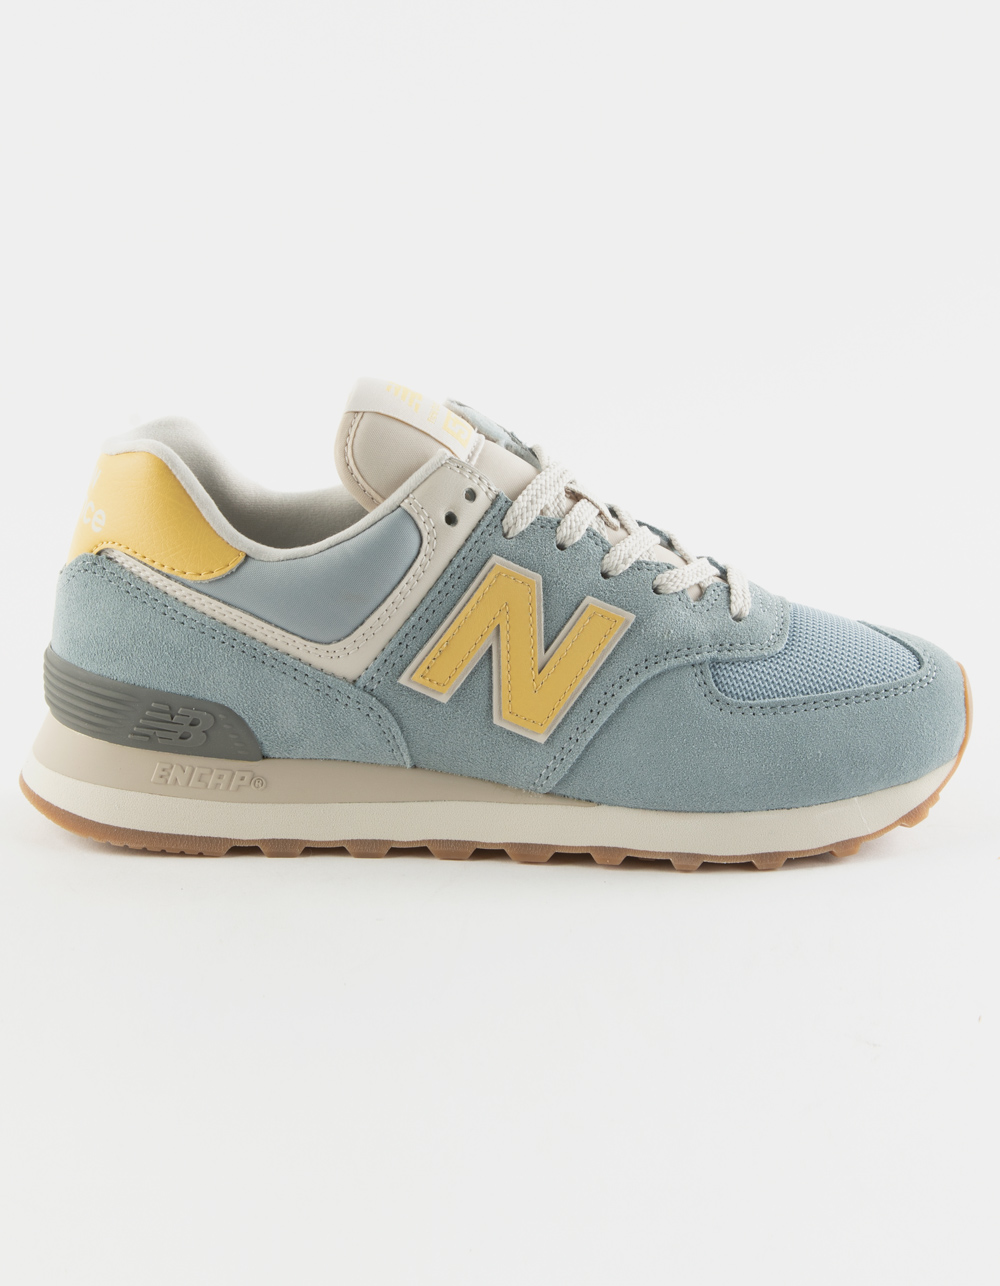 Pacer Leia intimidad NEW BALANCE 574 Womens Shoes - BABY BLUE | Tillys